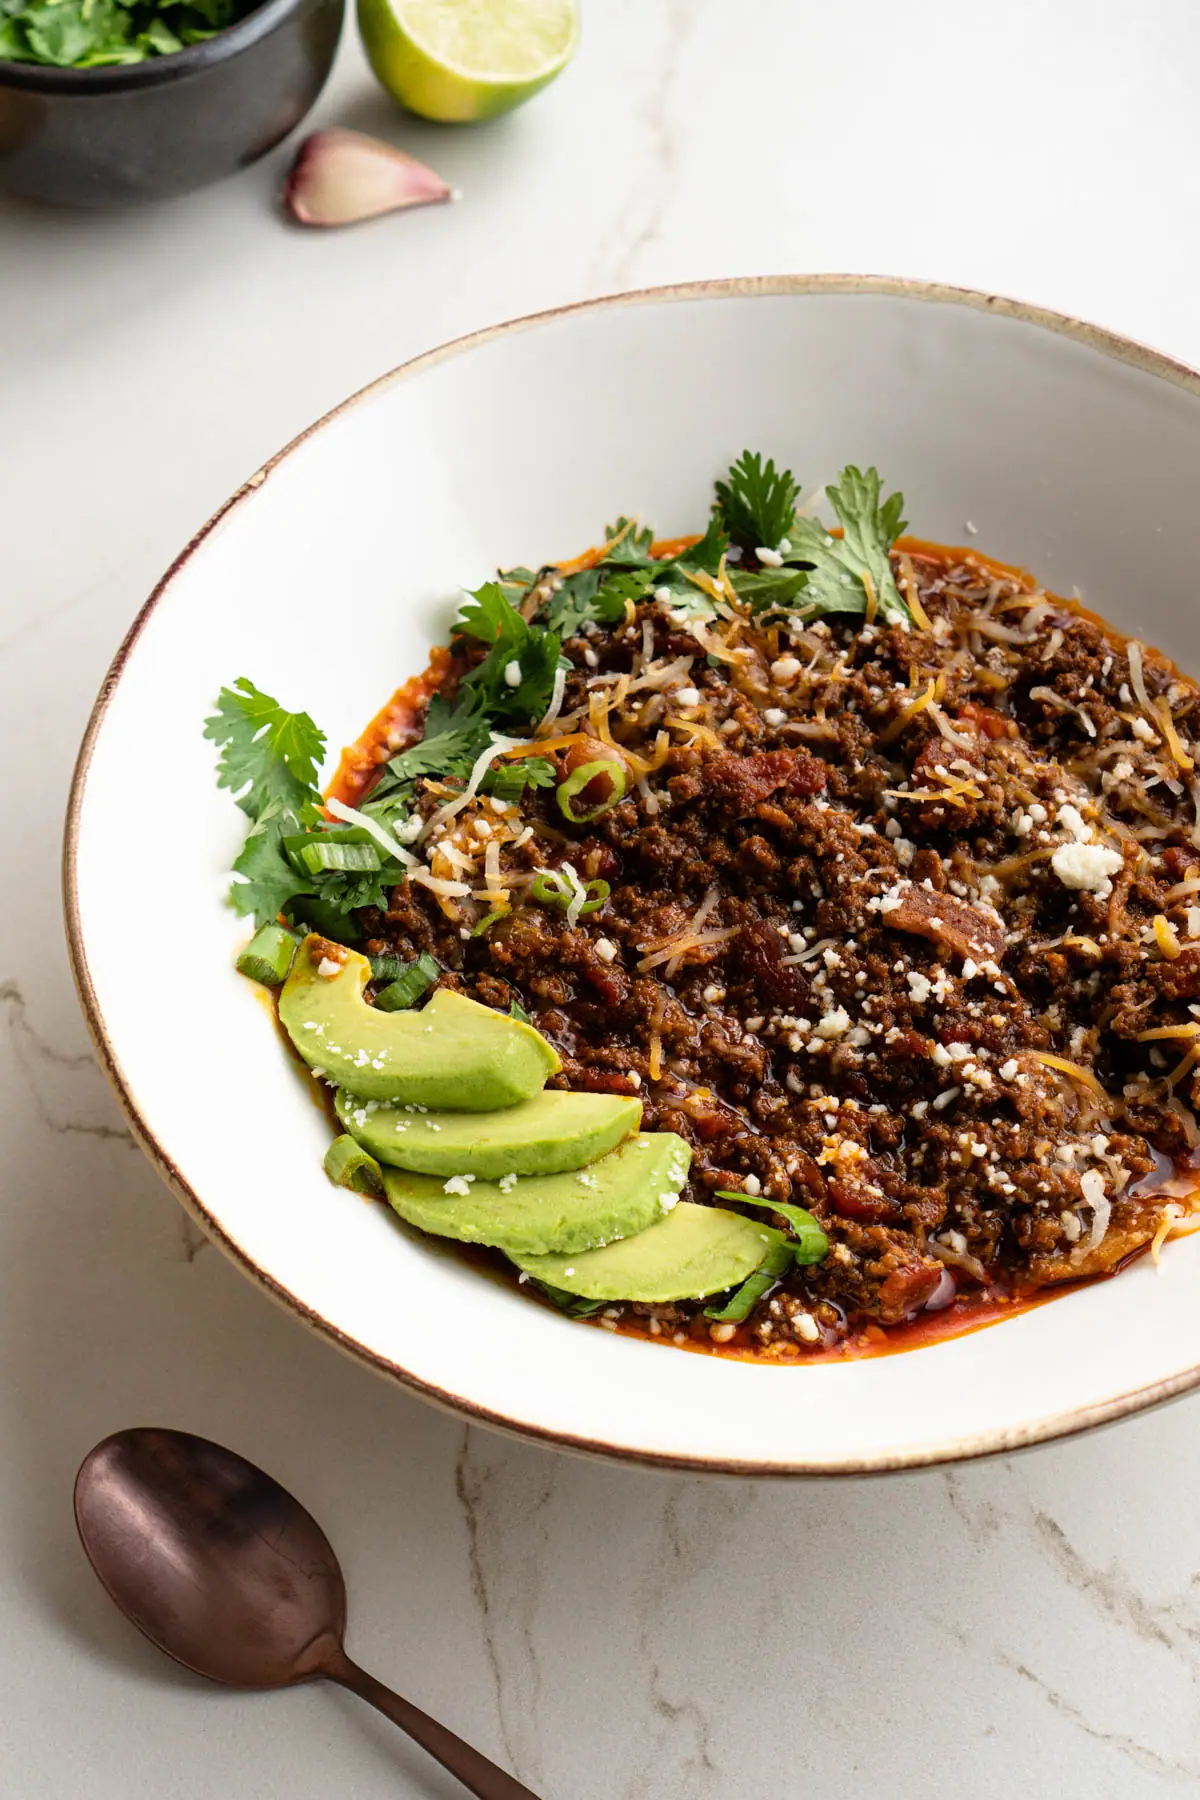 Keto chili con carne with avocado slices, cilantro, green onion, and cheese toppings.